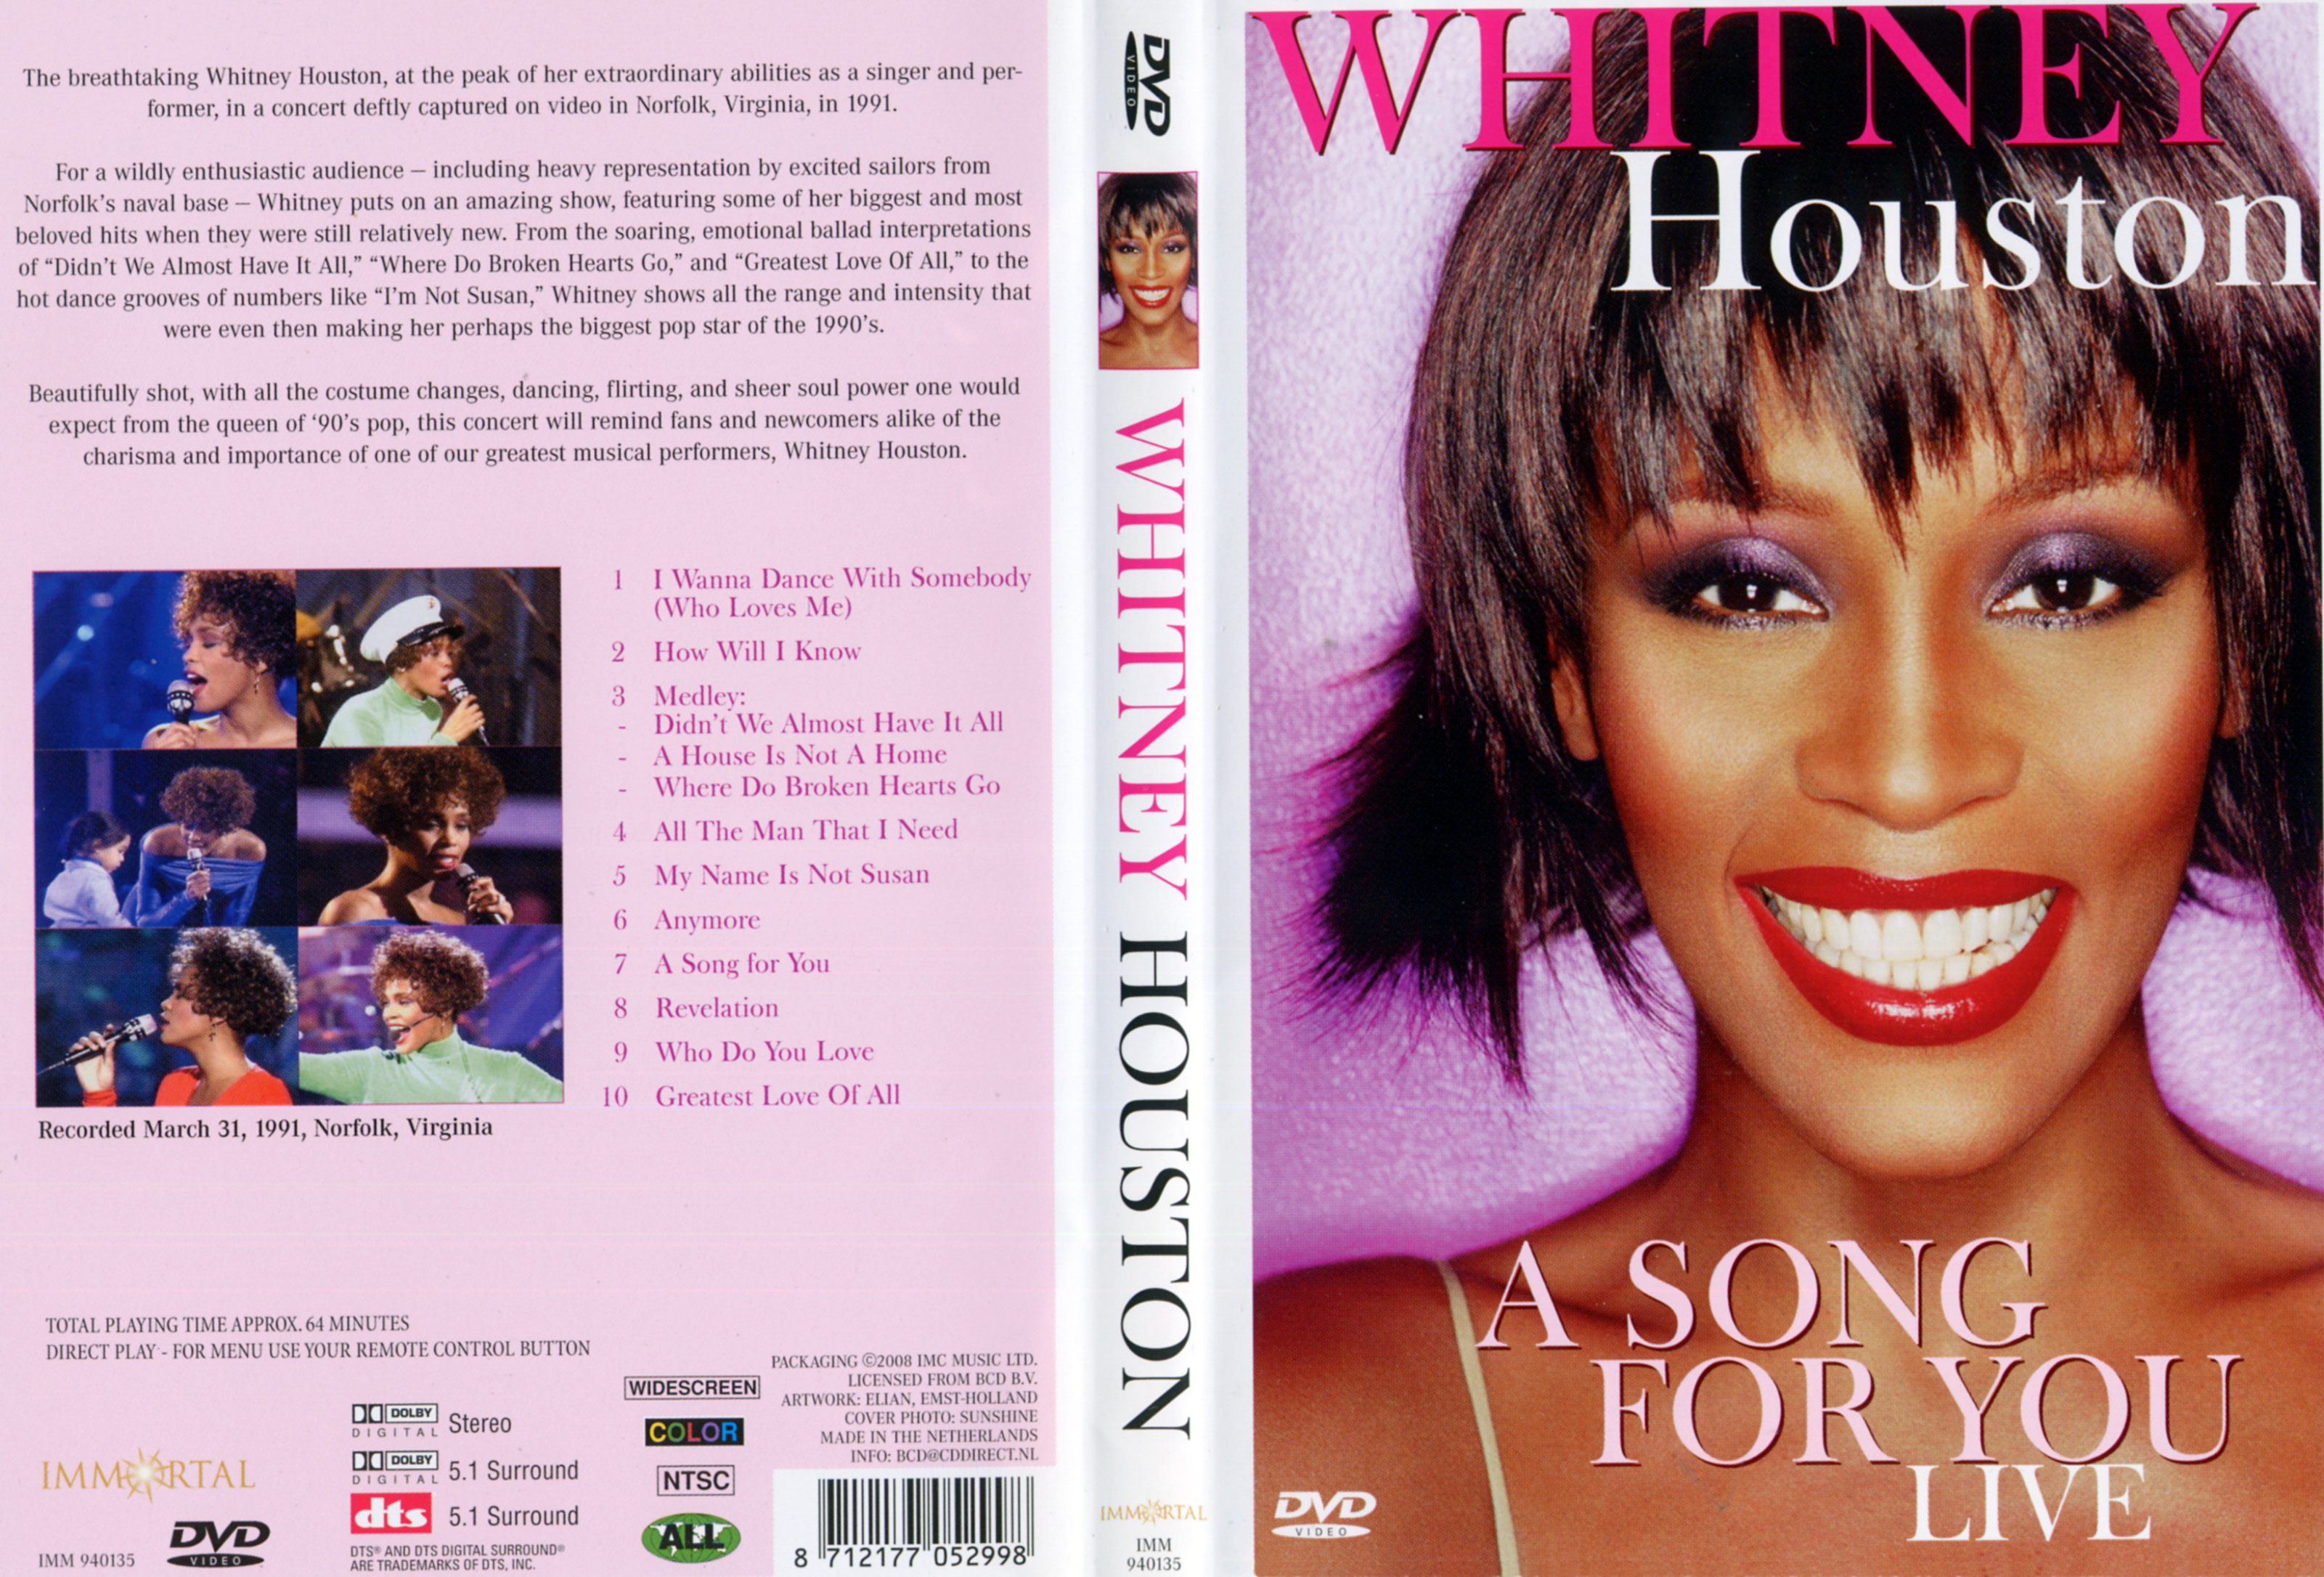 Jaquette DVD whitney Houston - A song for you live 1991